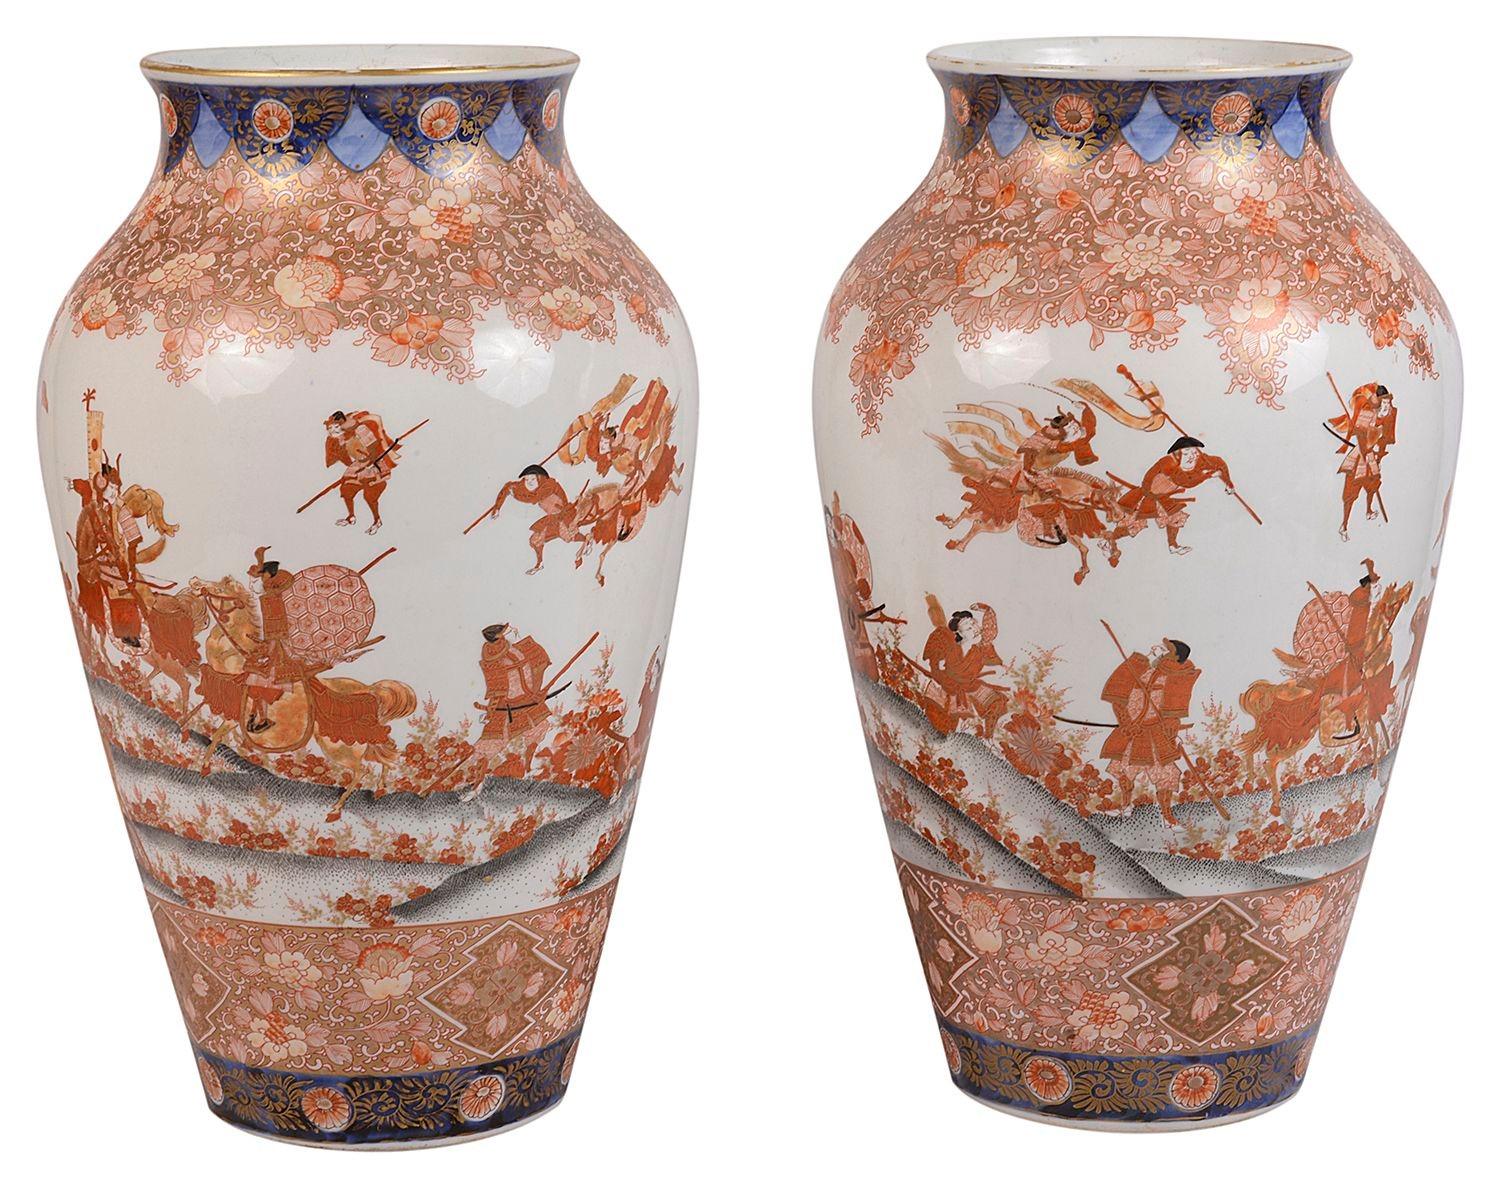 A fine quality pair of late 19th Century Japanese Fukagawa porcelain vases / lamps. Each with wonderful colouring to the classical motif boarders top and bottom and scenes of warring warriors.

Batch 72 G9846/. ANKZ